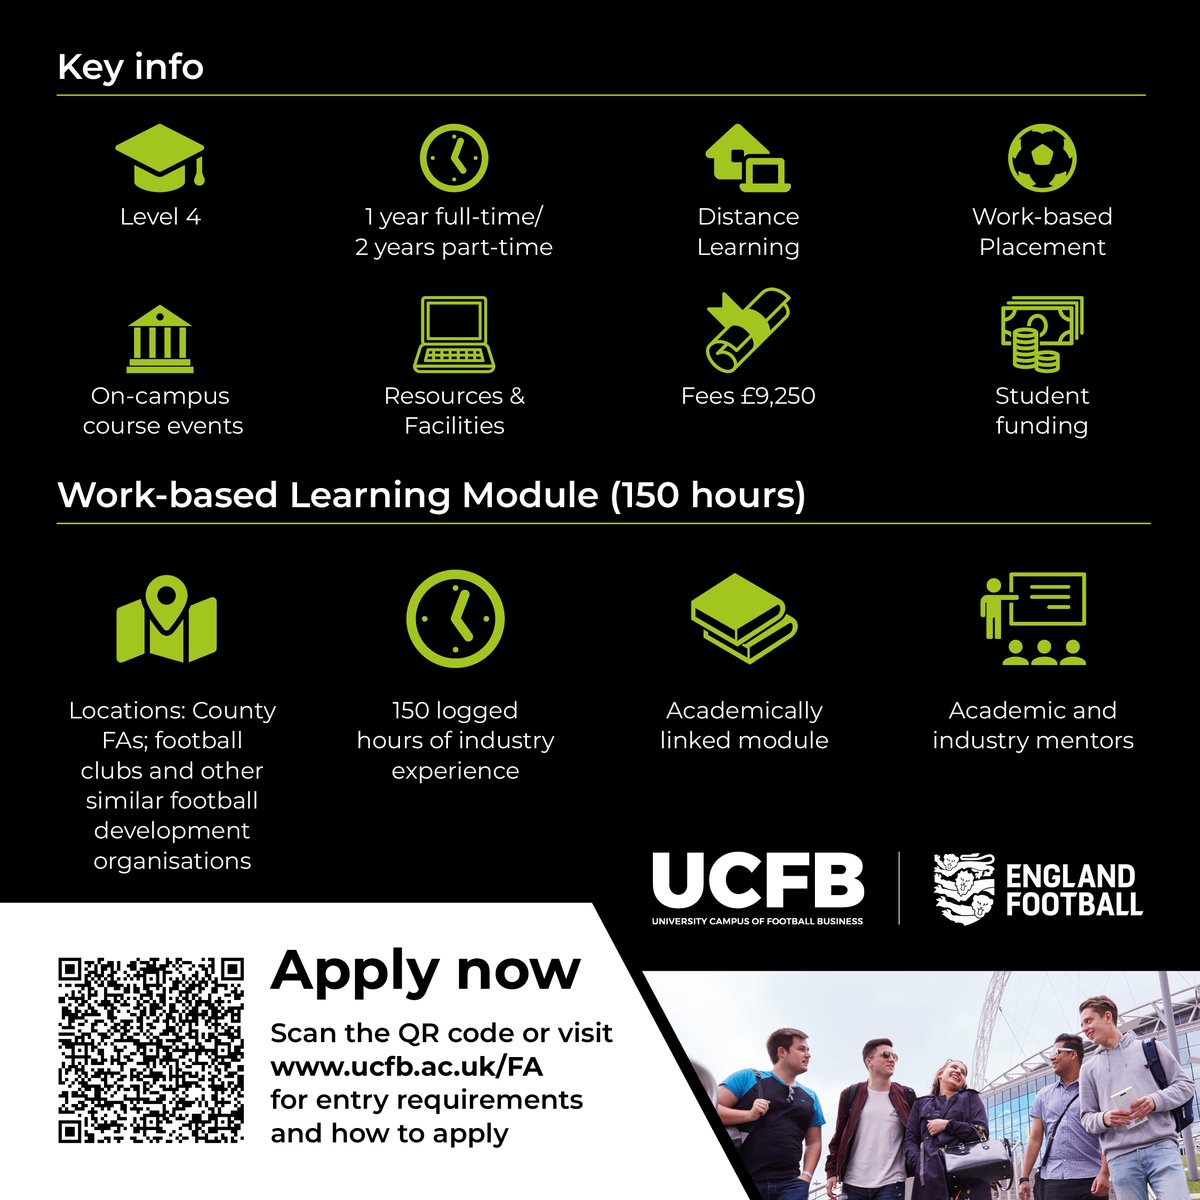 🎓 @UCFB has launched a new Certificate of Higher Education, in collaboration with @Englandfootball and the @FA, to support career opportunities within football. It includes one year of distance learning and 150 hours of industry experience. Read more: pulse.ly/dk0dgenzwk